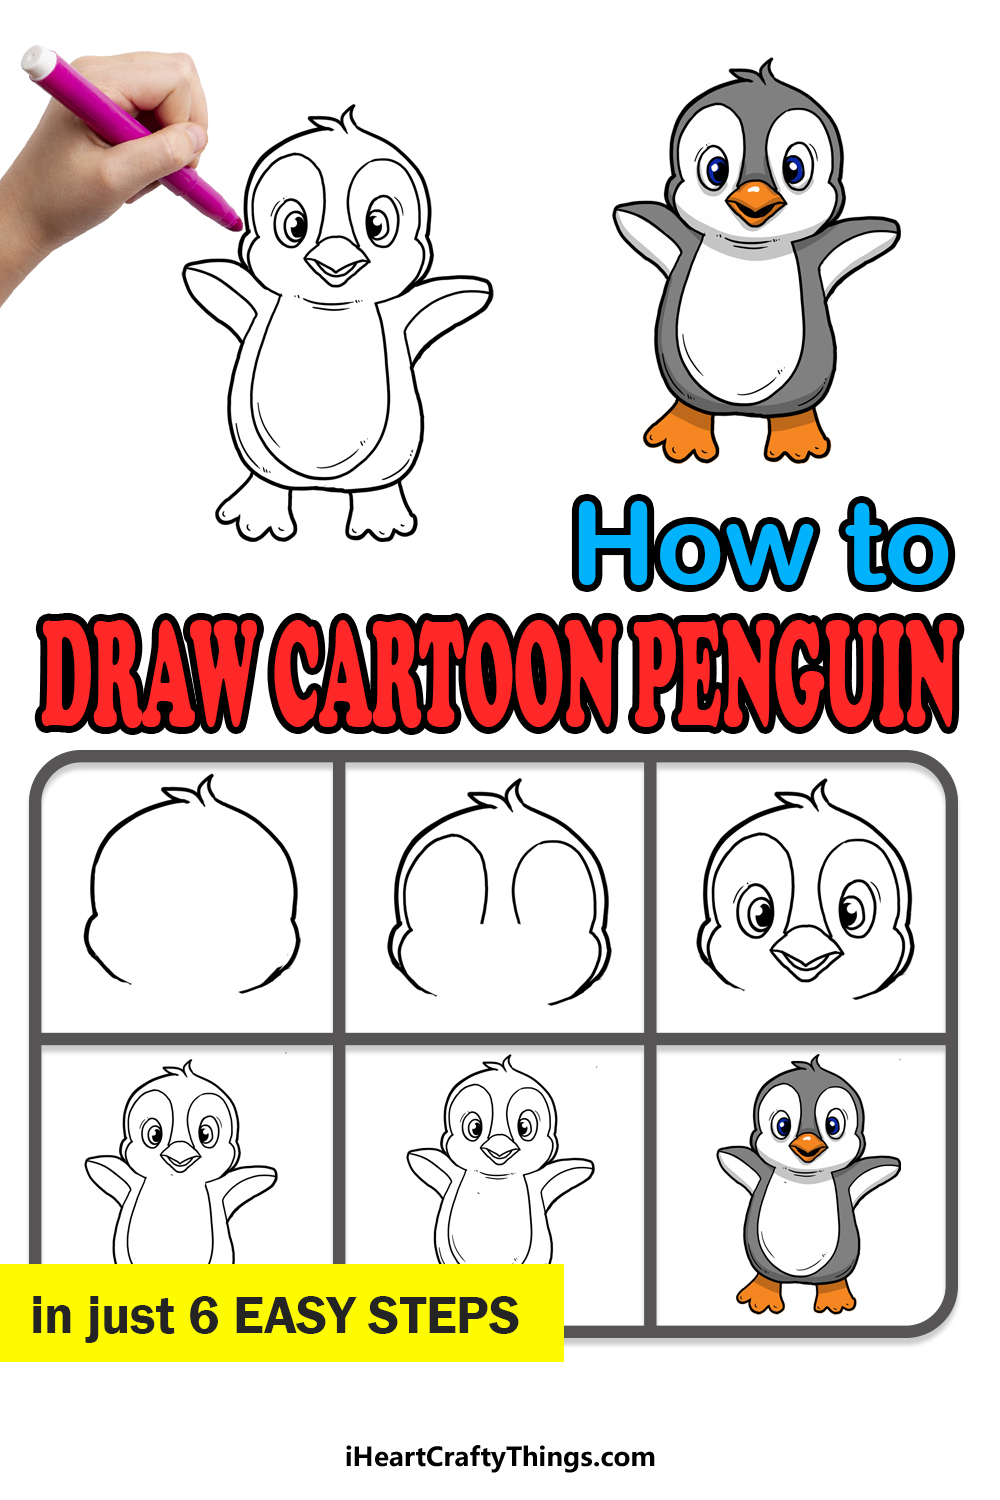 How to Draw A Cartoon Penguin step by step guide